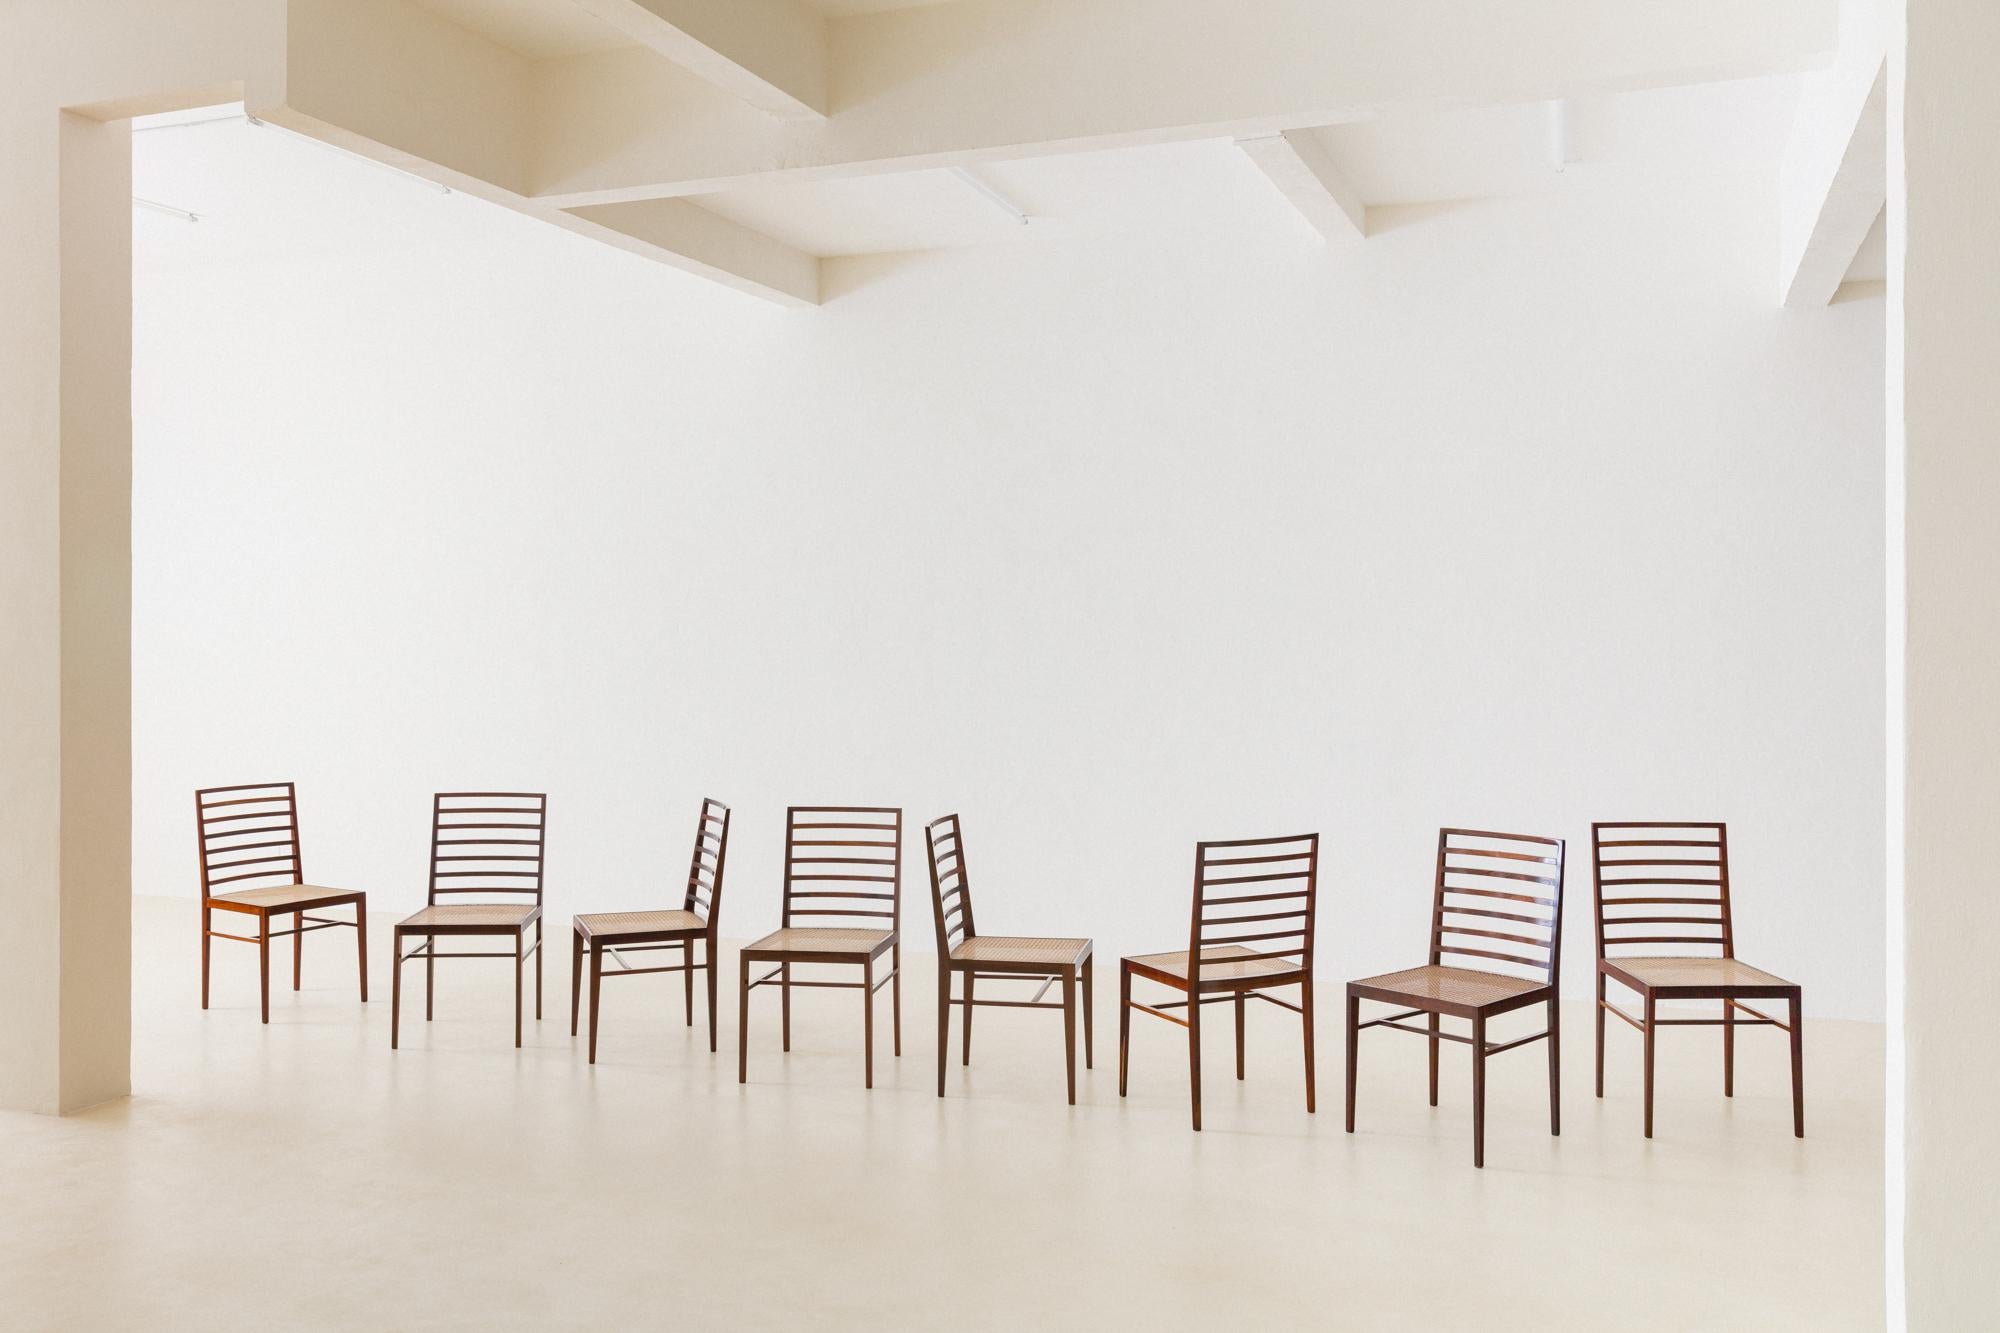 This set of eight chairs was designed by Joaquim Tenreiro (1906-1992) in the 1950s. These breathtaking chairs are made of solid rosewood, with slatted backs and cane seats.

As with other pieces created by Tenreiro, the lightness is present not